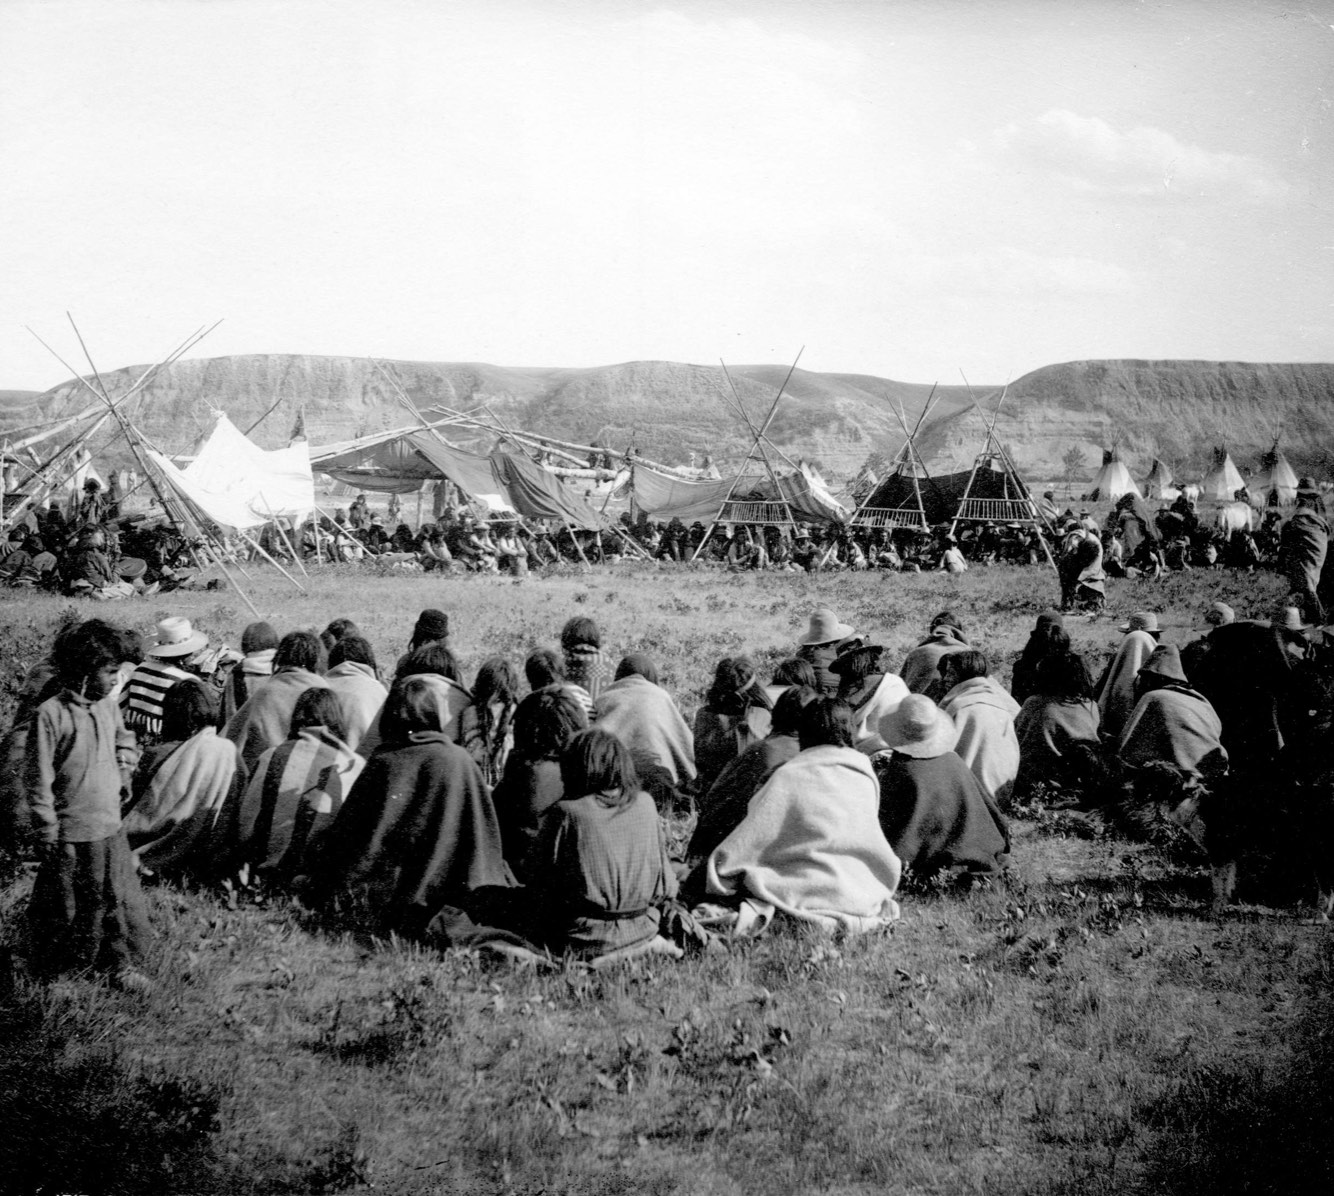 Policies in Canada made it illegal to engage in First Nations cultural and ceremonies during the early part of the 20th century. Today individuals and communities are actively engaged in reclaiming their traditional practices. This picture was taken at a Sun Dance Ceremony of the Blackfeet Nation, Gleichen, NWT, just prior to the ceremony being outlawed.